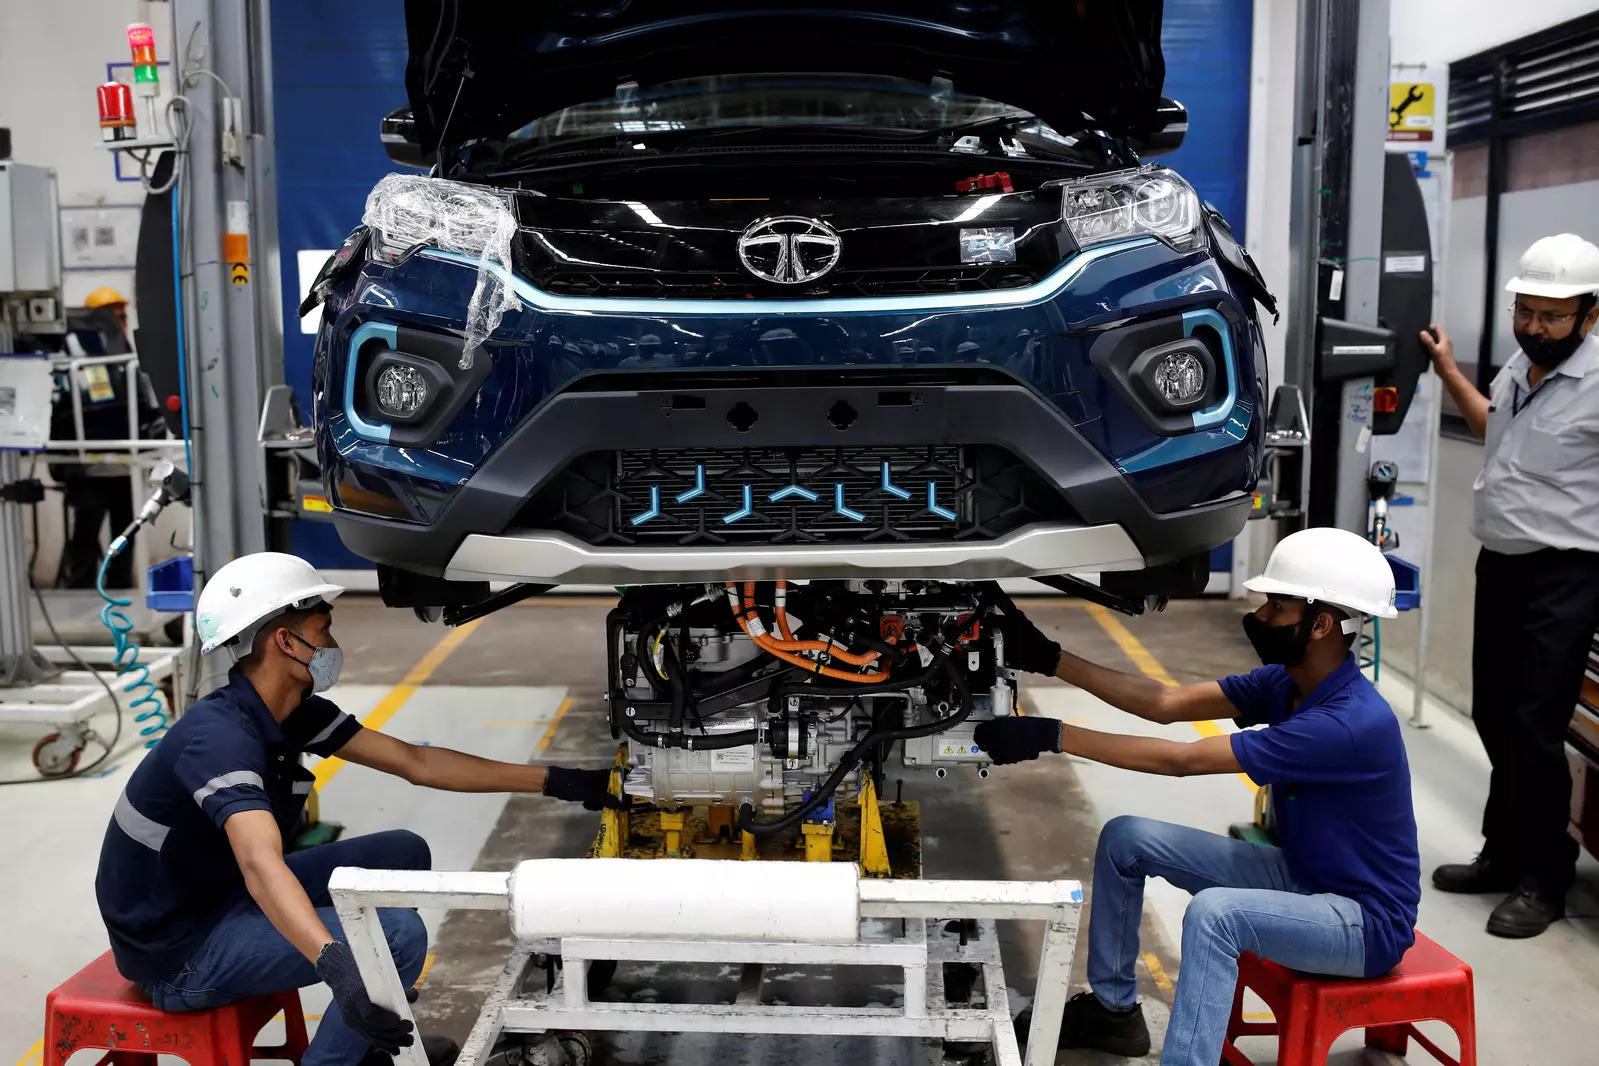  Workers install the electric motor inside a Tata Nexon electric sport utility vehicle (SUV) at the Tata Motors plant in Pune. 